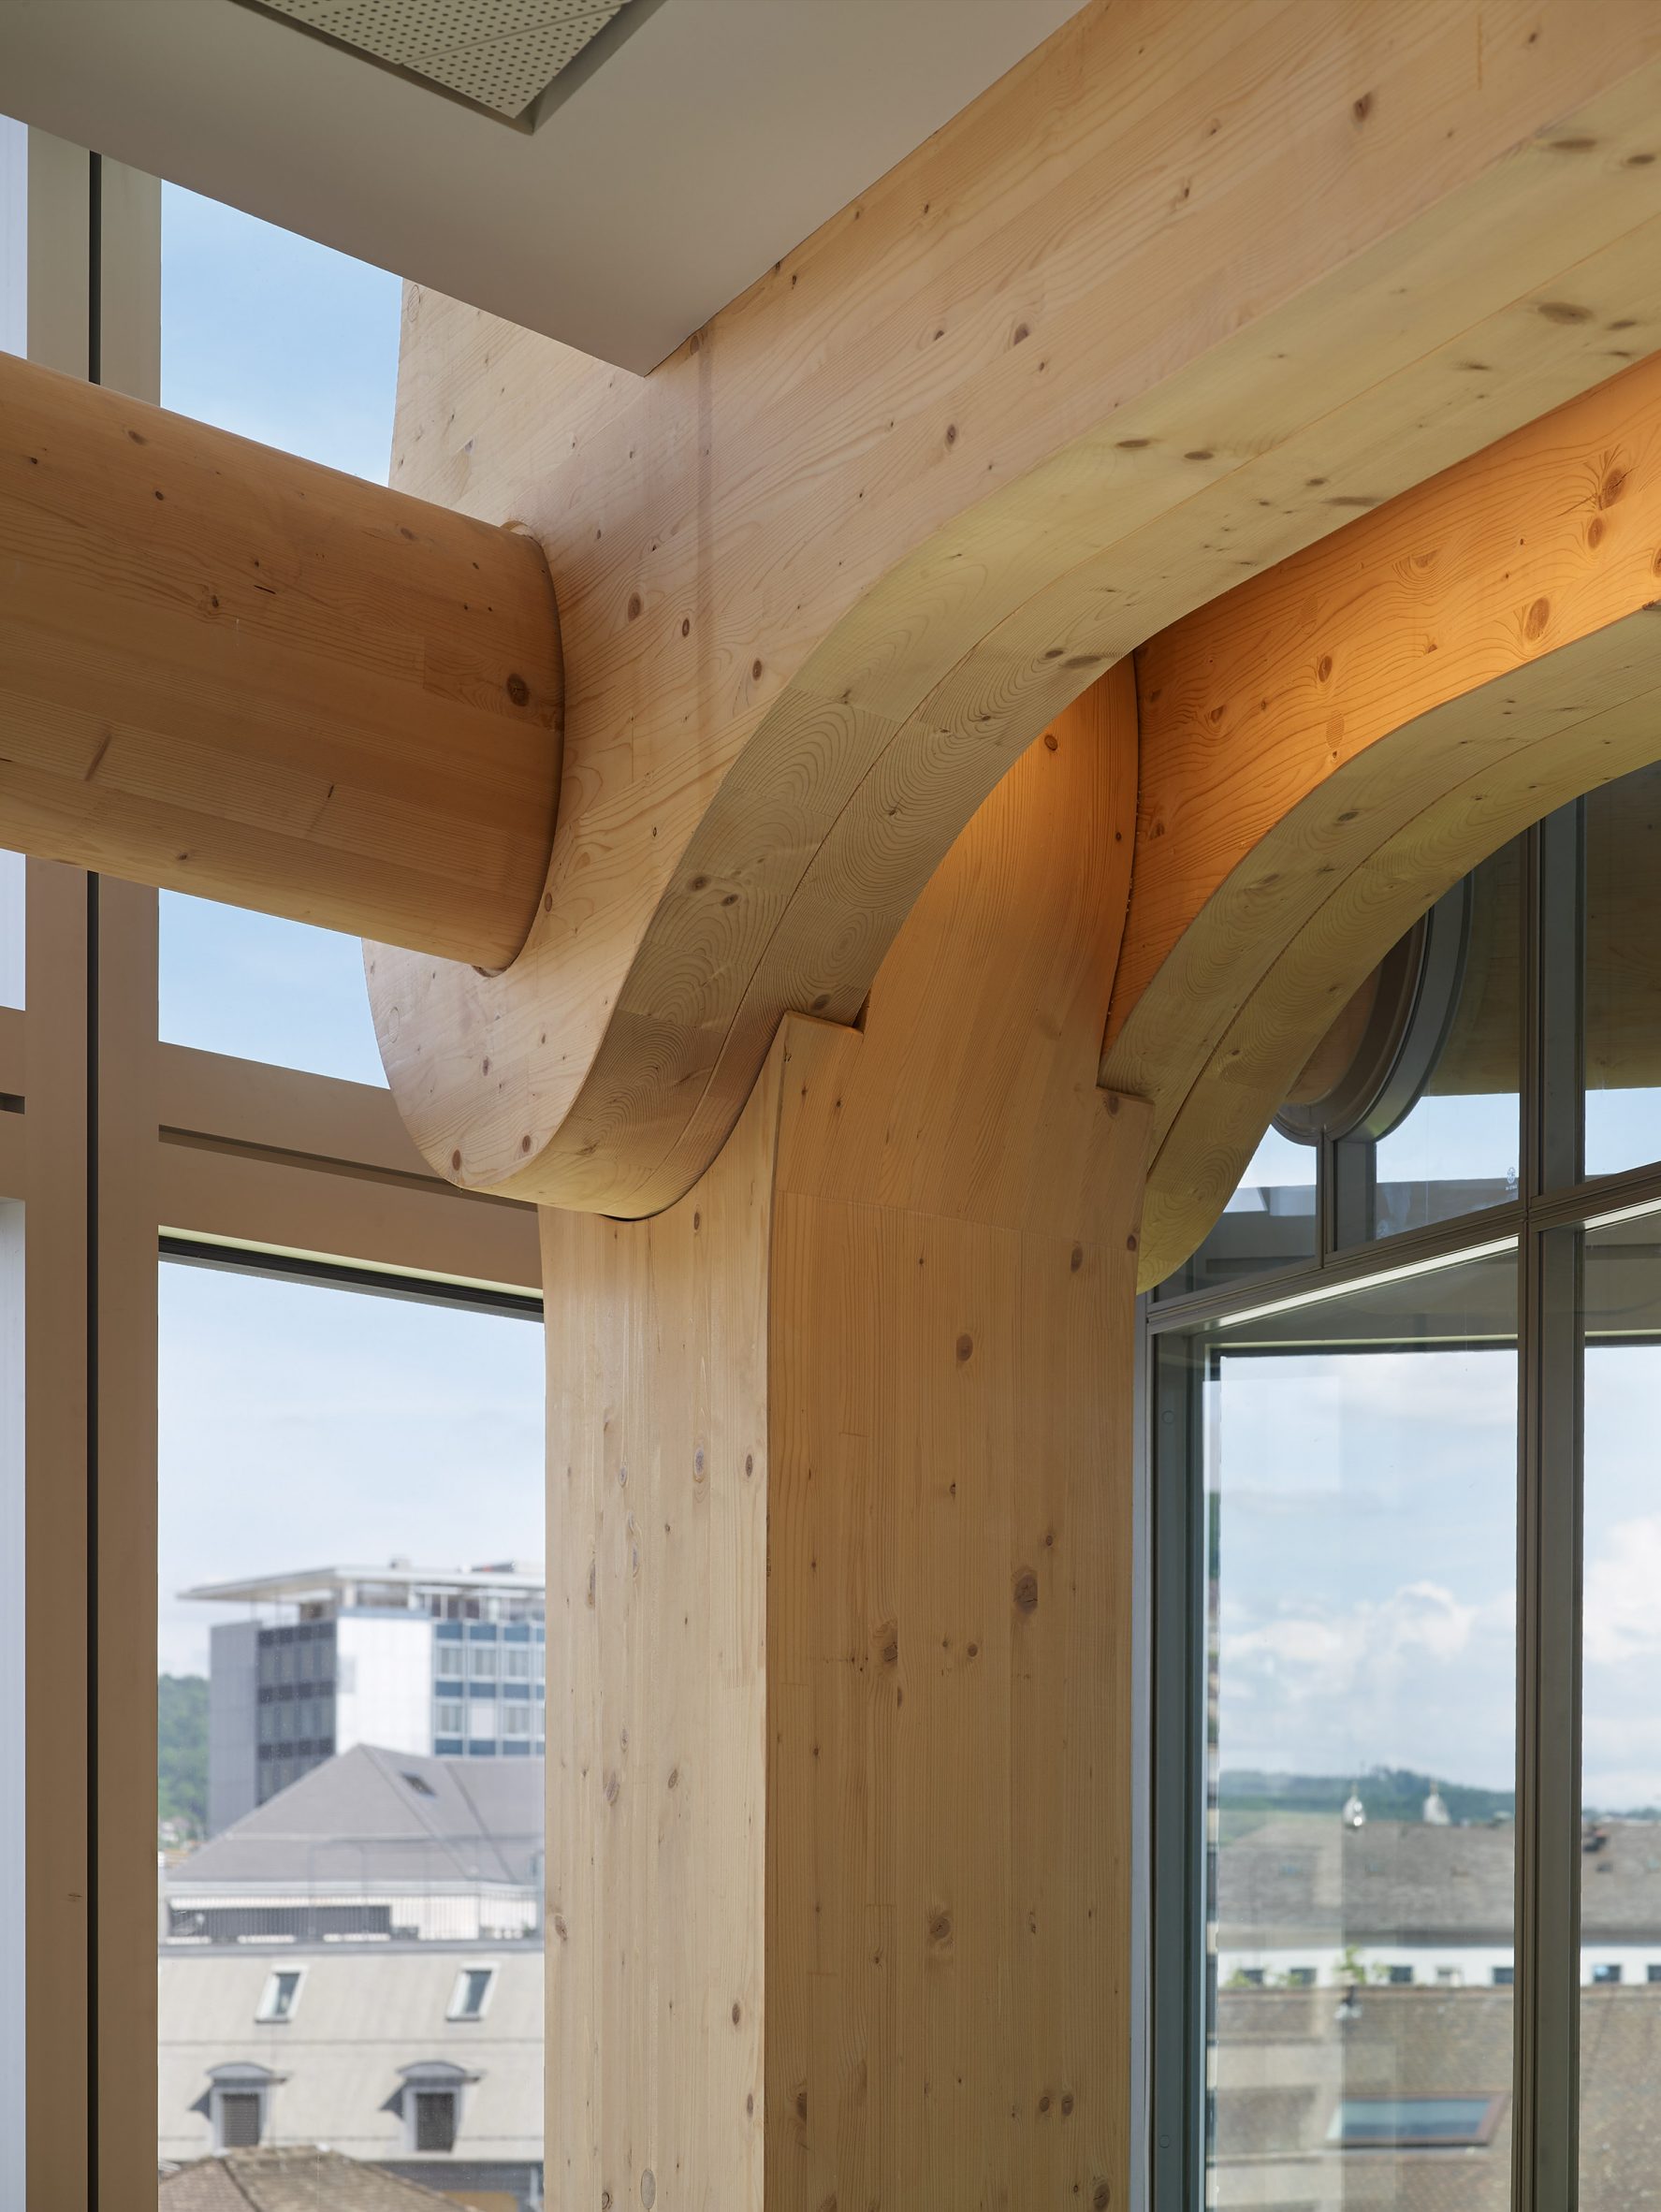 Joint of timber frame in Zurich office building by Shigeru Ban